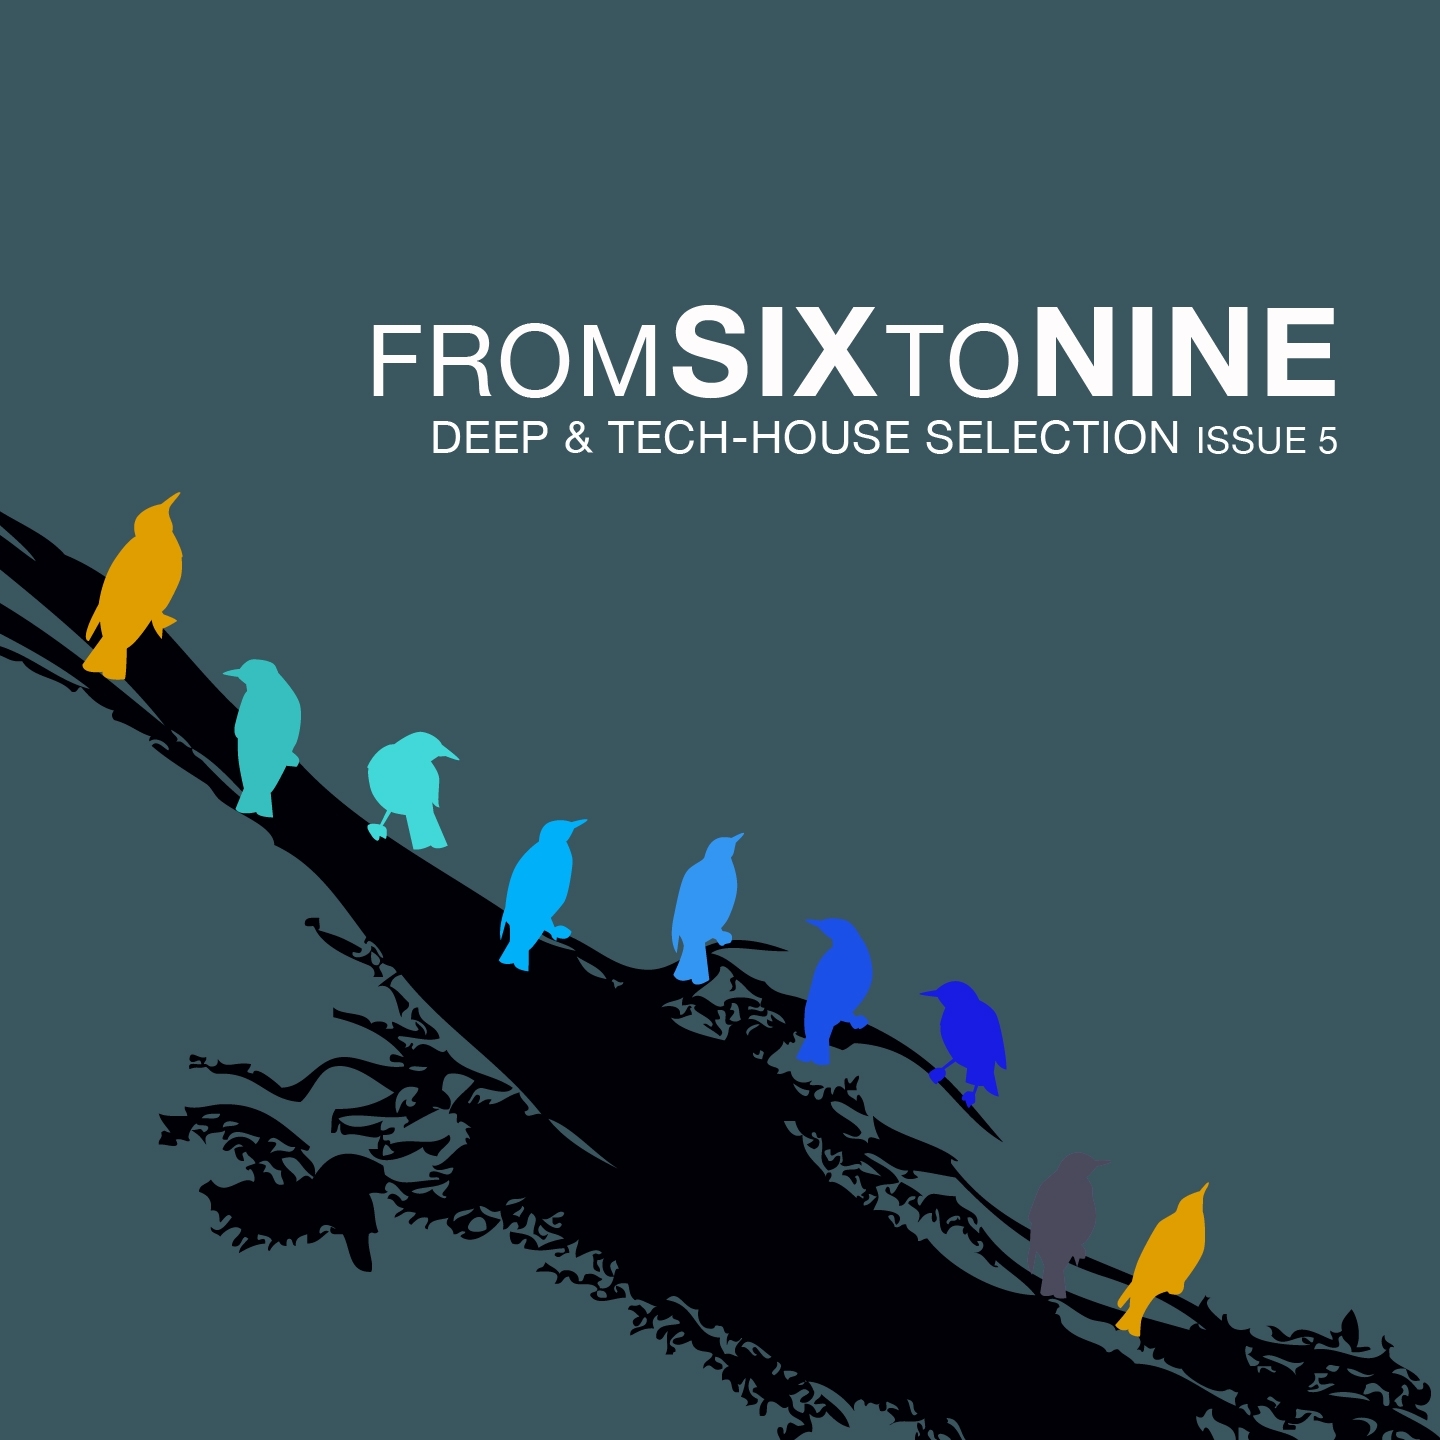 Fromsixtonine Issue 5 (Deep & Tech House Selection)